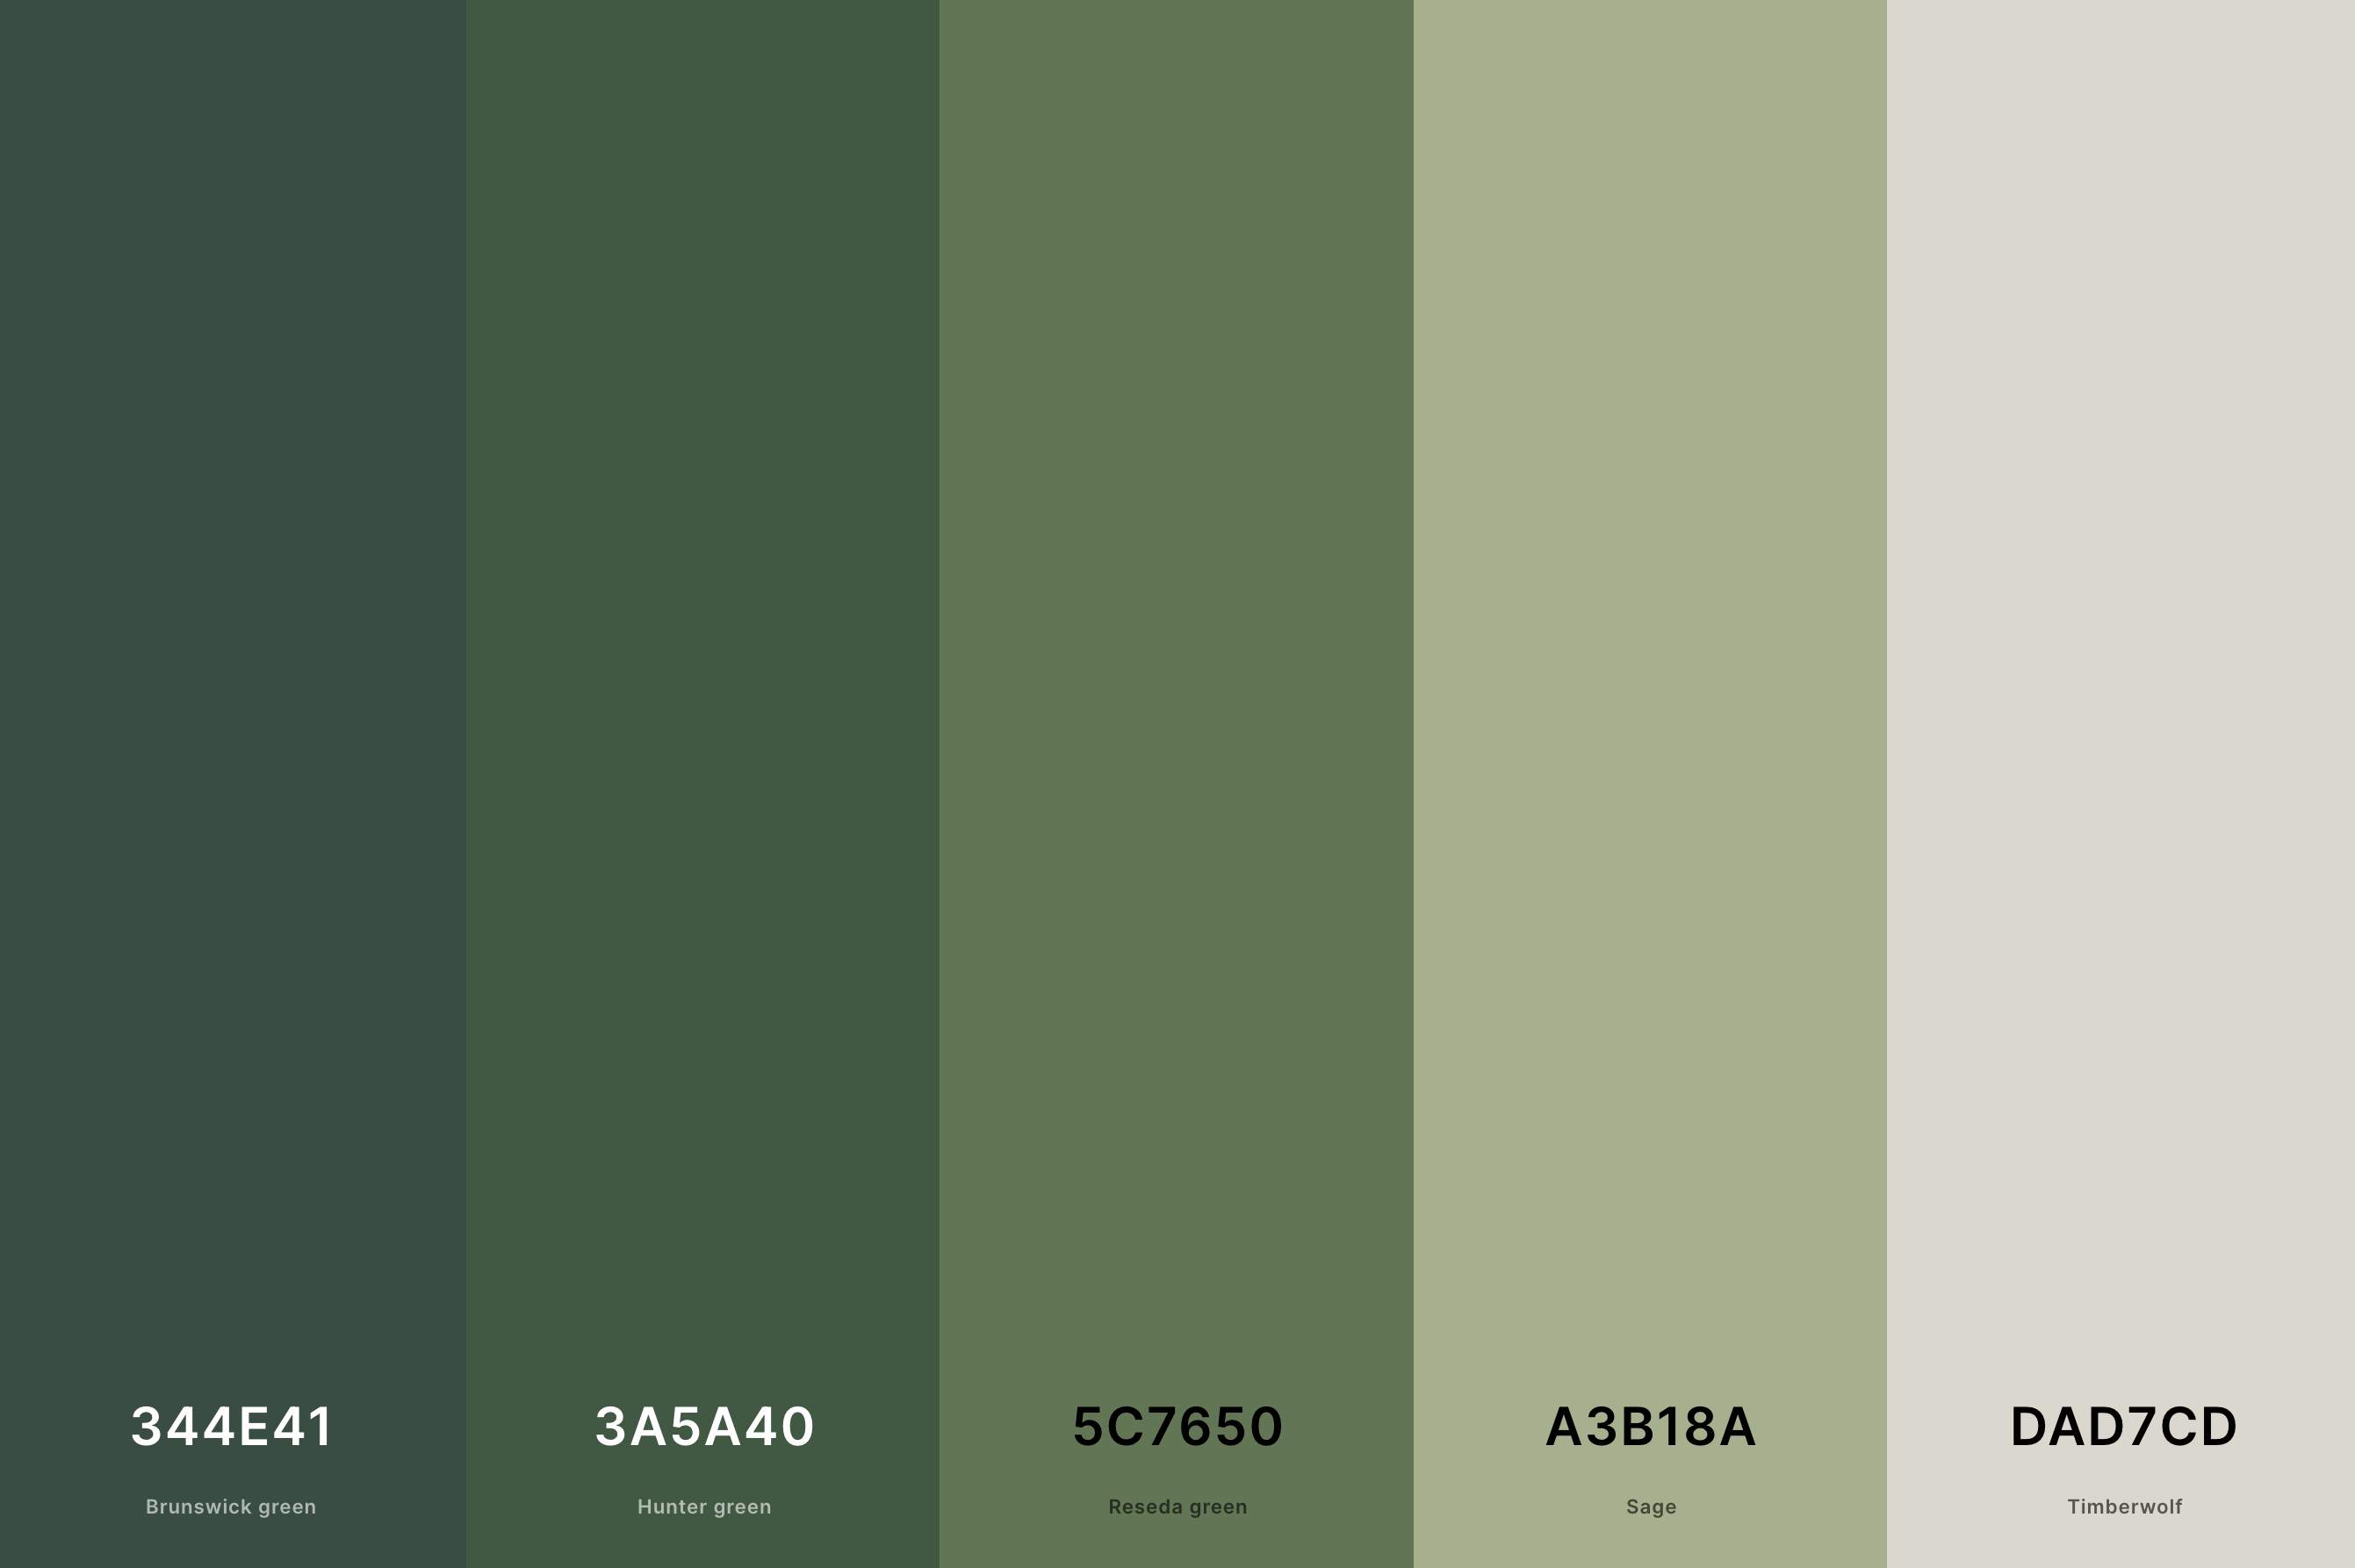 1. Sage Green Color Palette Color Palette with Brunswick Green (Hex #344E41) + Hunter Green (Hex #3A5A40) + Reseda Green (Hex #5C7650) + Sage (Hex #A3B18A) + Timberwolf (Hex #DAD7CD) Color Palette with Hex Codes